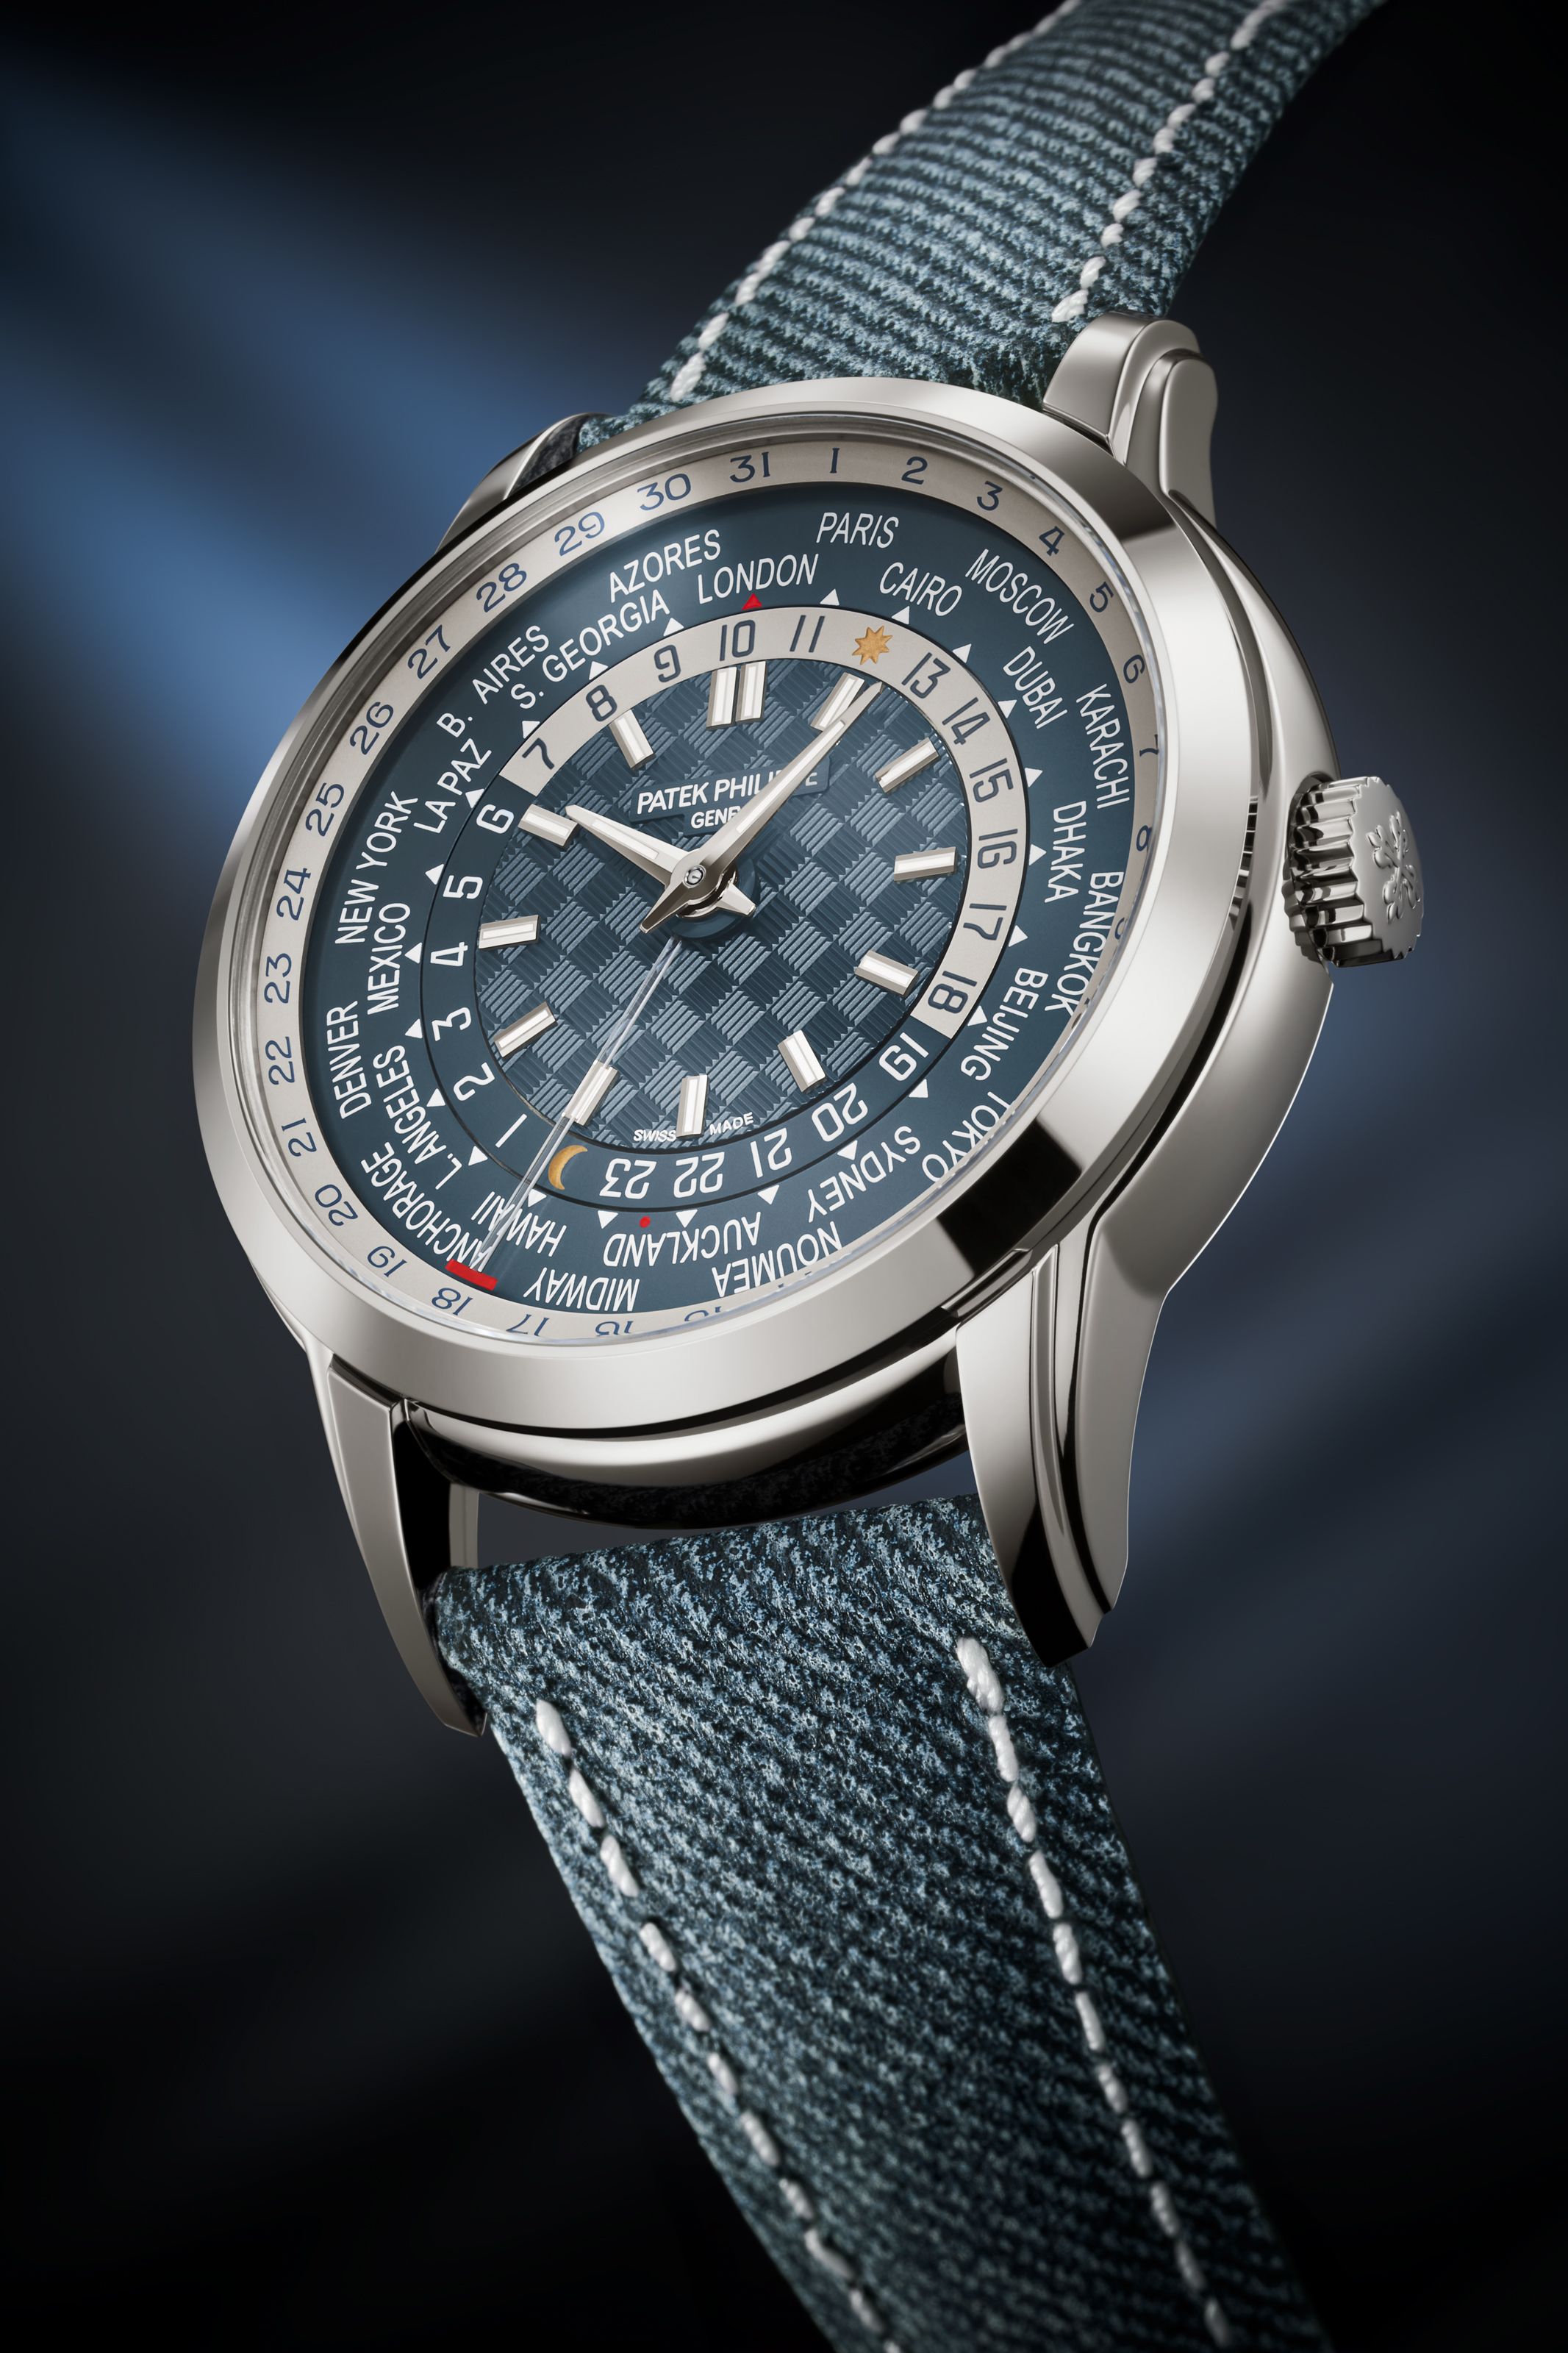 The Patek Philippe World Time Reference 5330G-001 offers an 18k white gold case